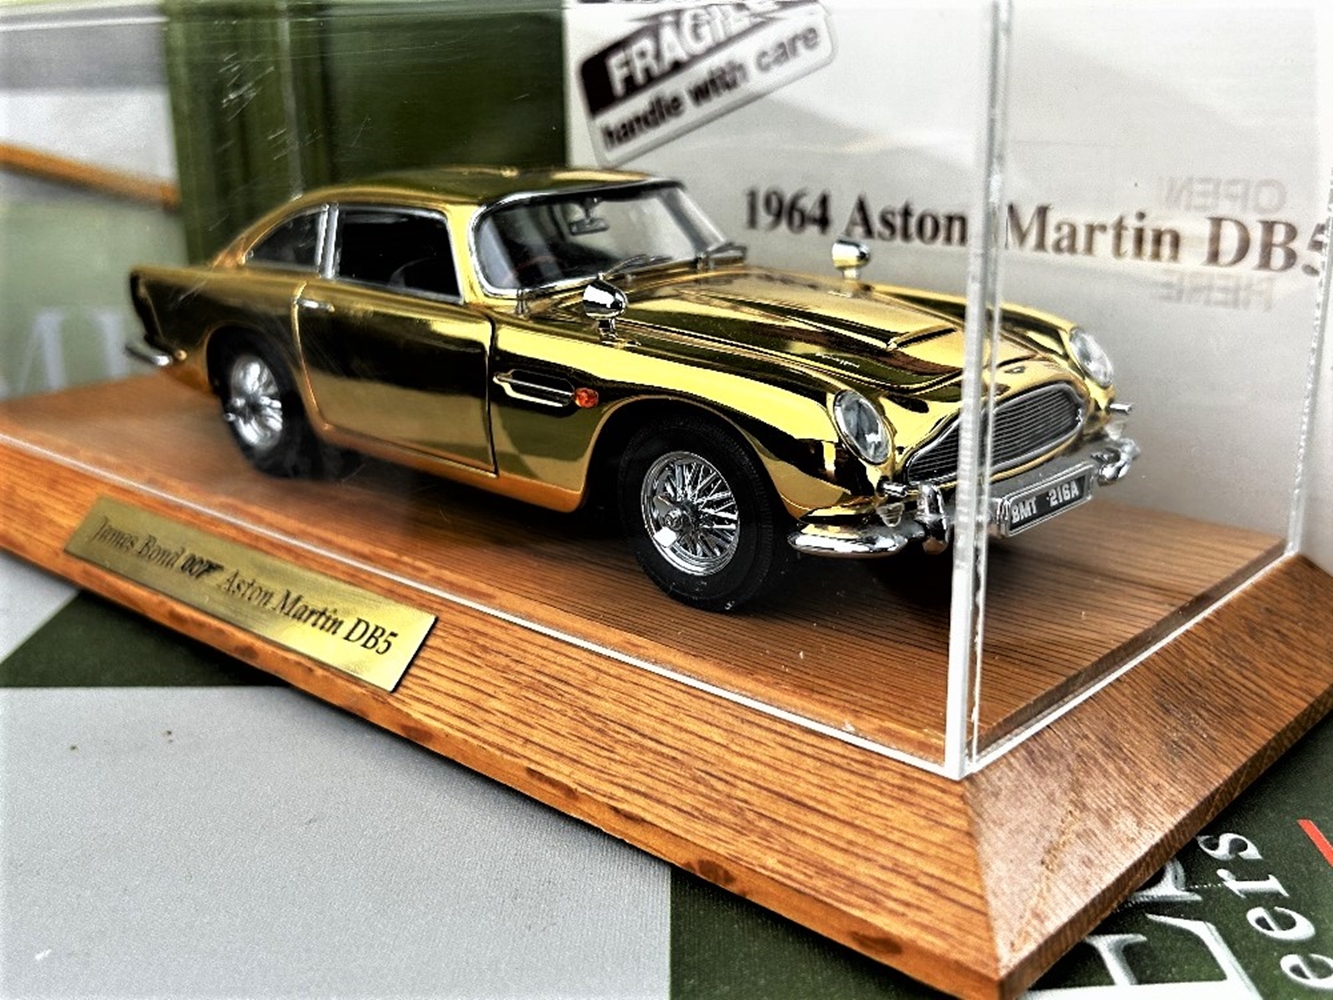 Danbury Mint 1964 Aston Martin DB5 Complete Collection - Image 6 of 8